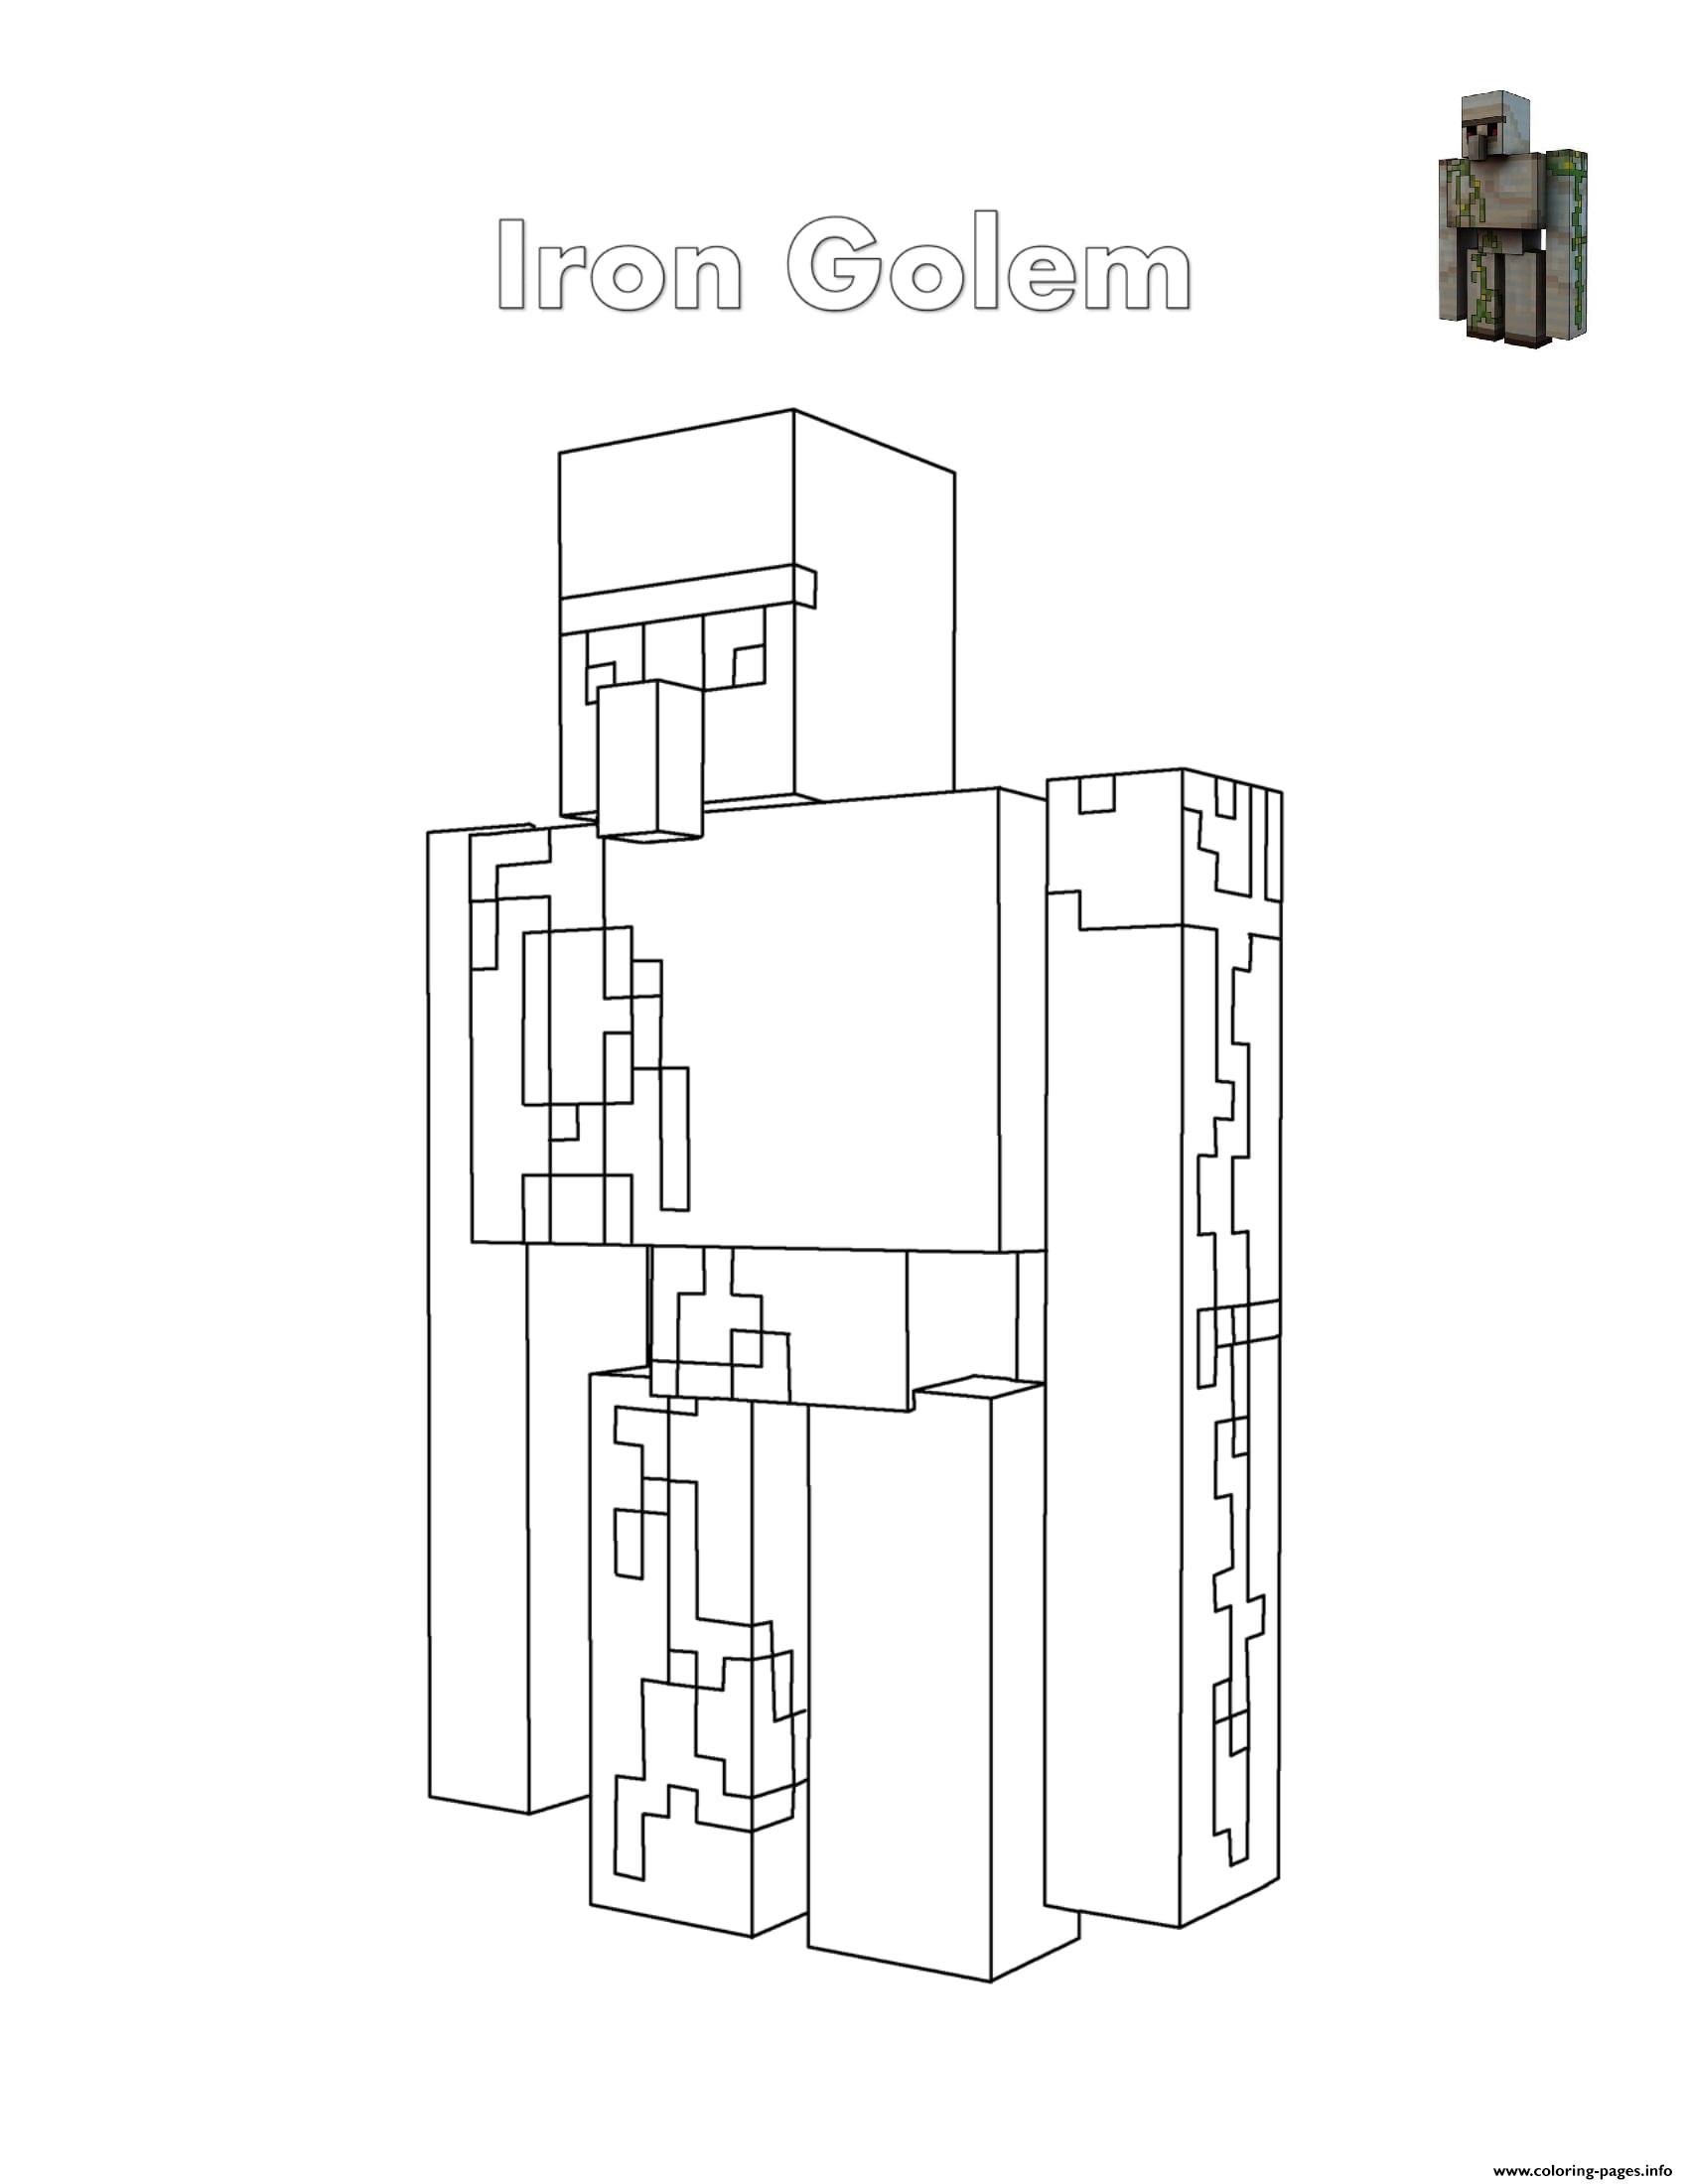 Mobileminecraft Snow Golem Coloring Pages Coloring Pages